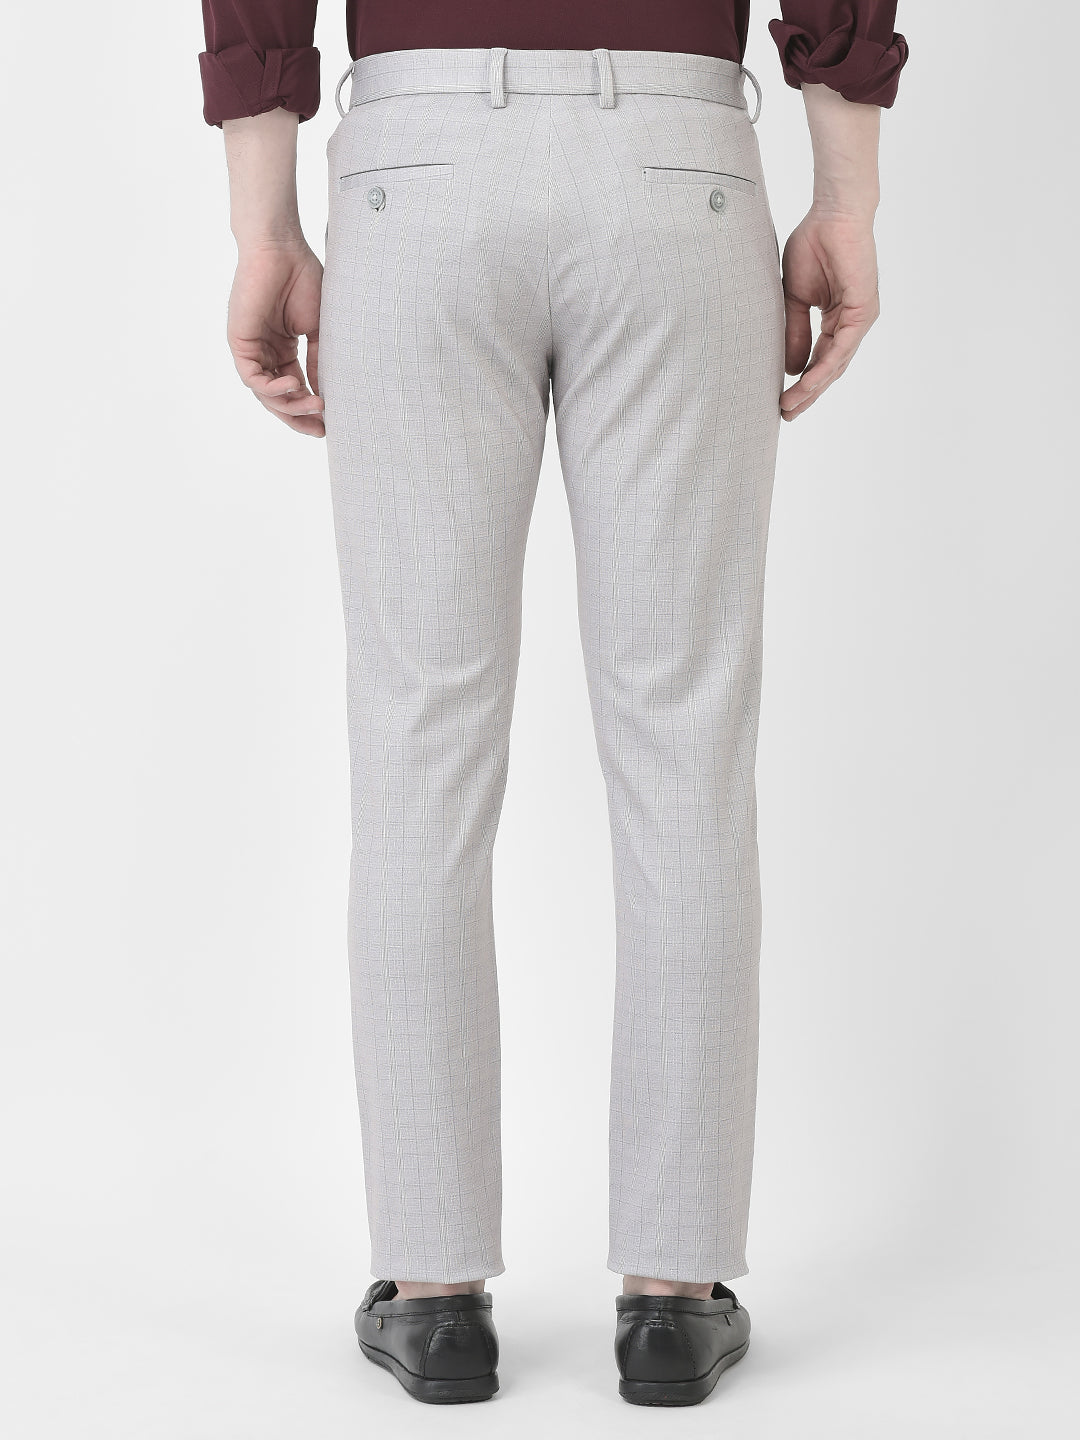  Checkered Light Grey Trousers